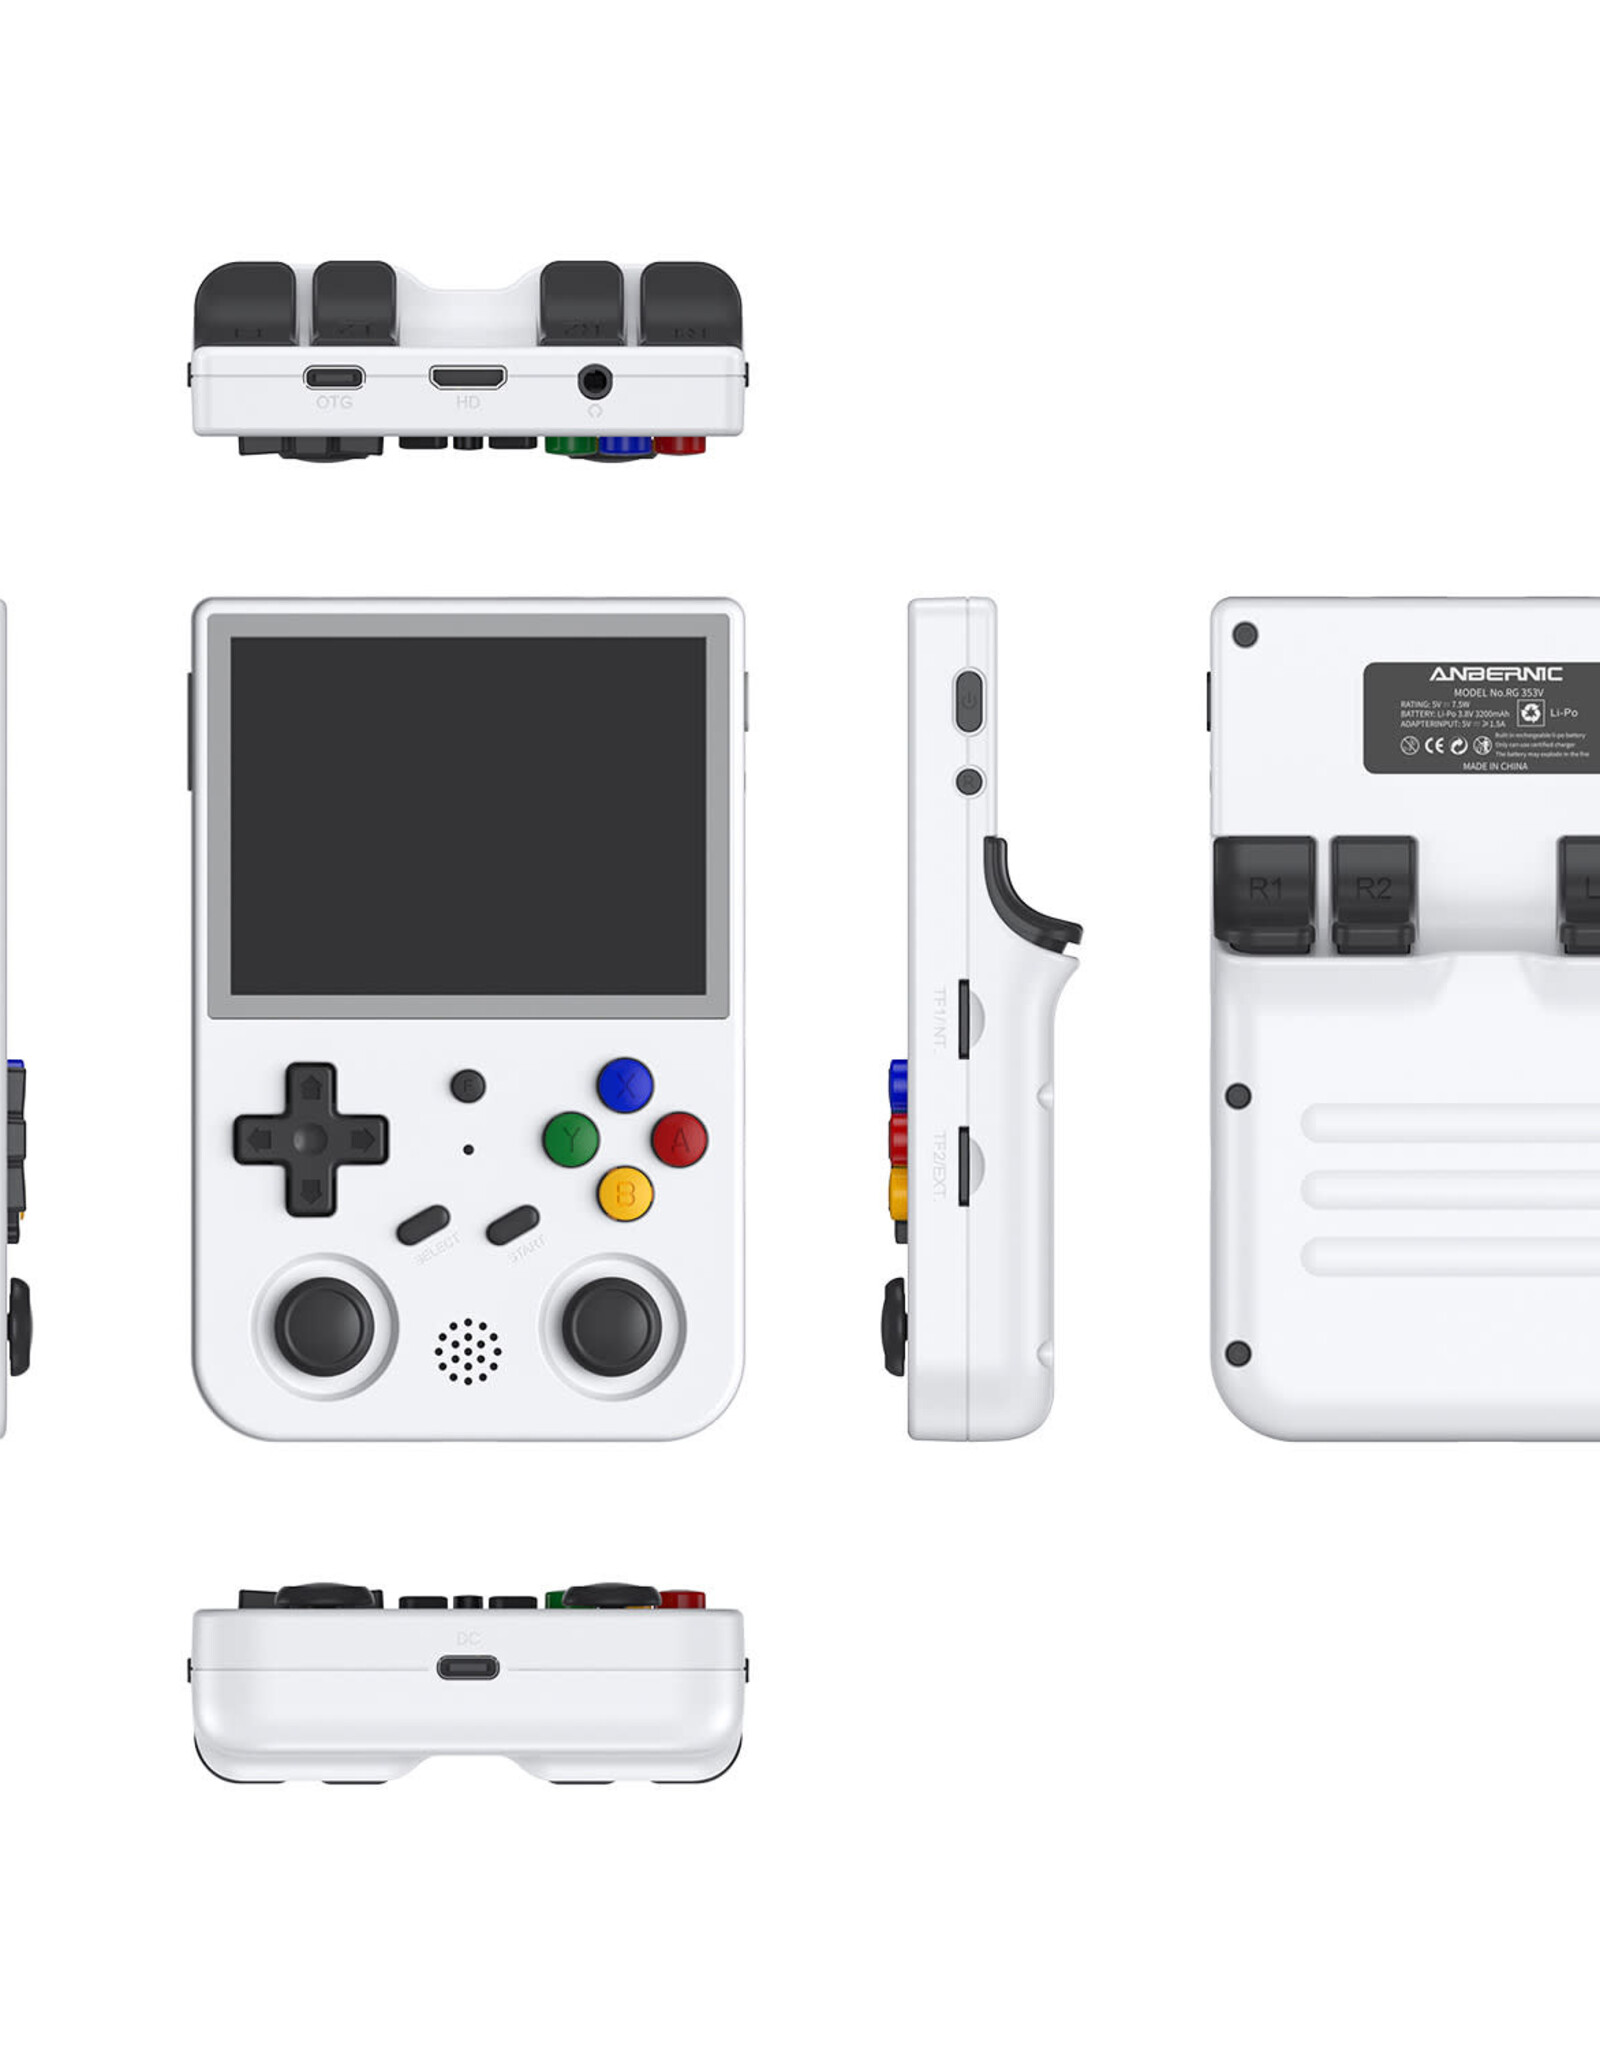 White 64GB B RG353V Handheld Game Console Support Dual OS Android 11+ Linux, 5G WiFi 4.2 Bluetooth RK3566 64BIT 64G TF Card 4450 Classic Games 3.5 Inch IPS Screen 3500mAh Battery (Anbernic RG353V White)